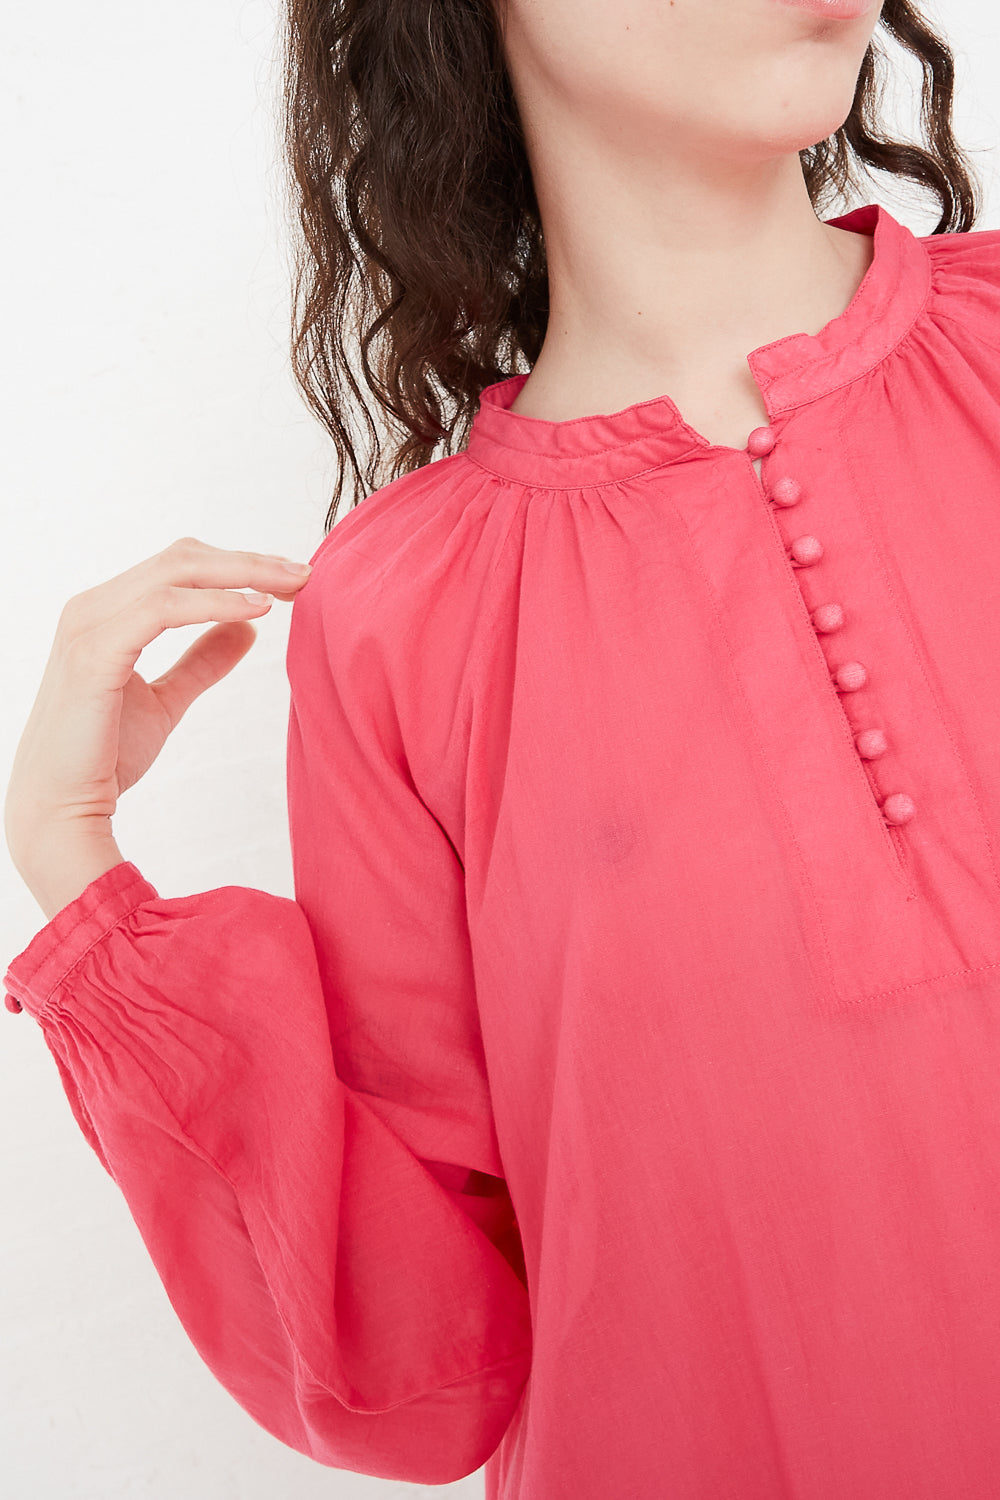 Dress in Pink sleeve and button placket detail